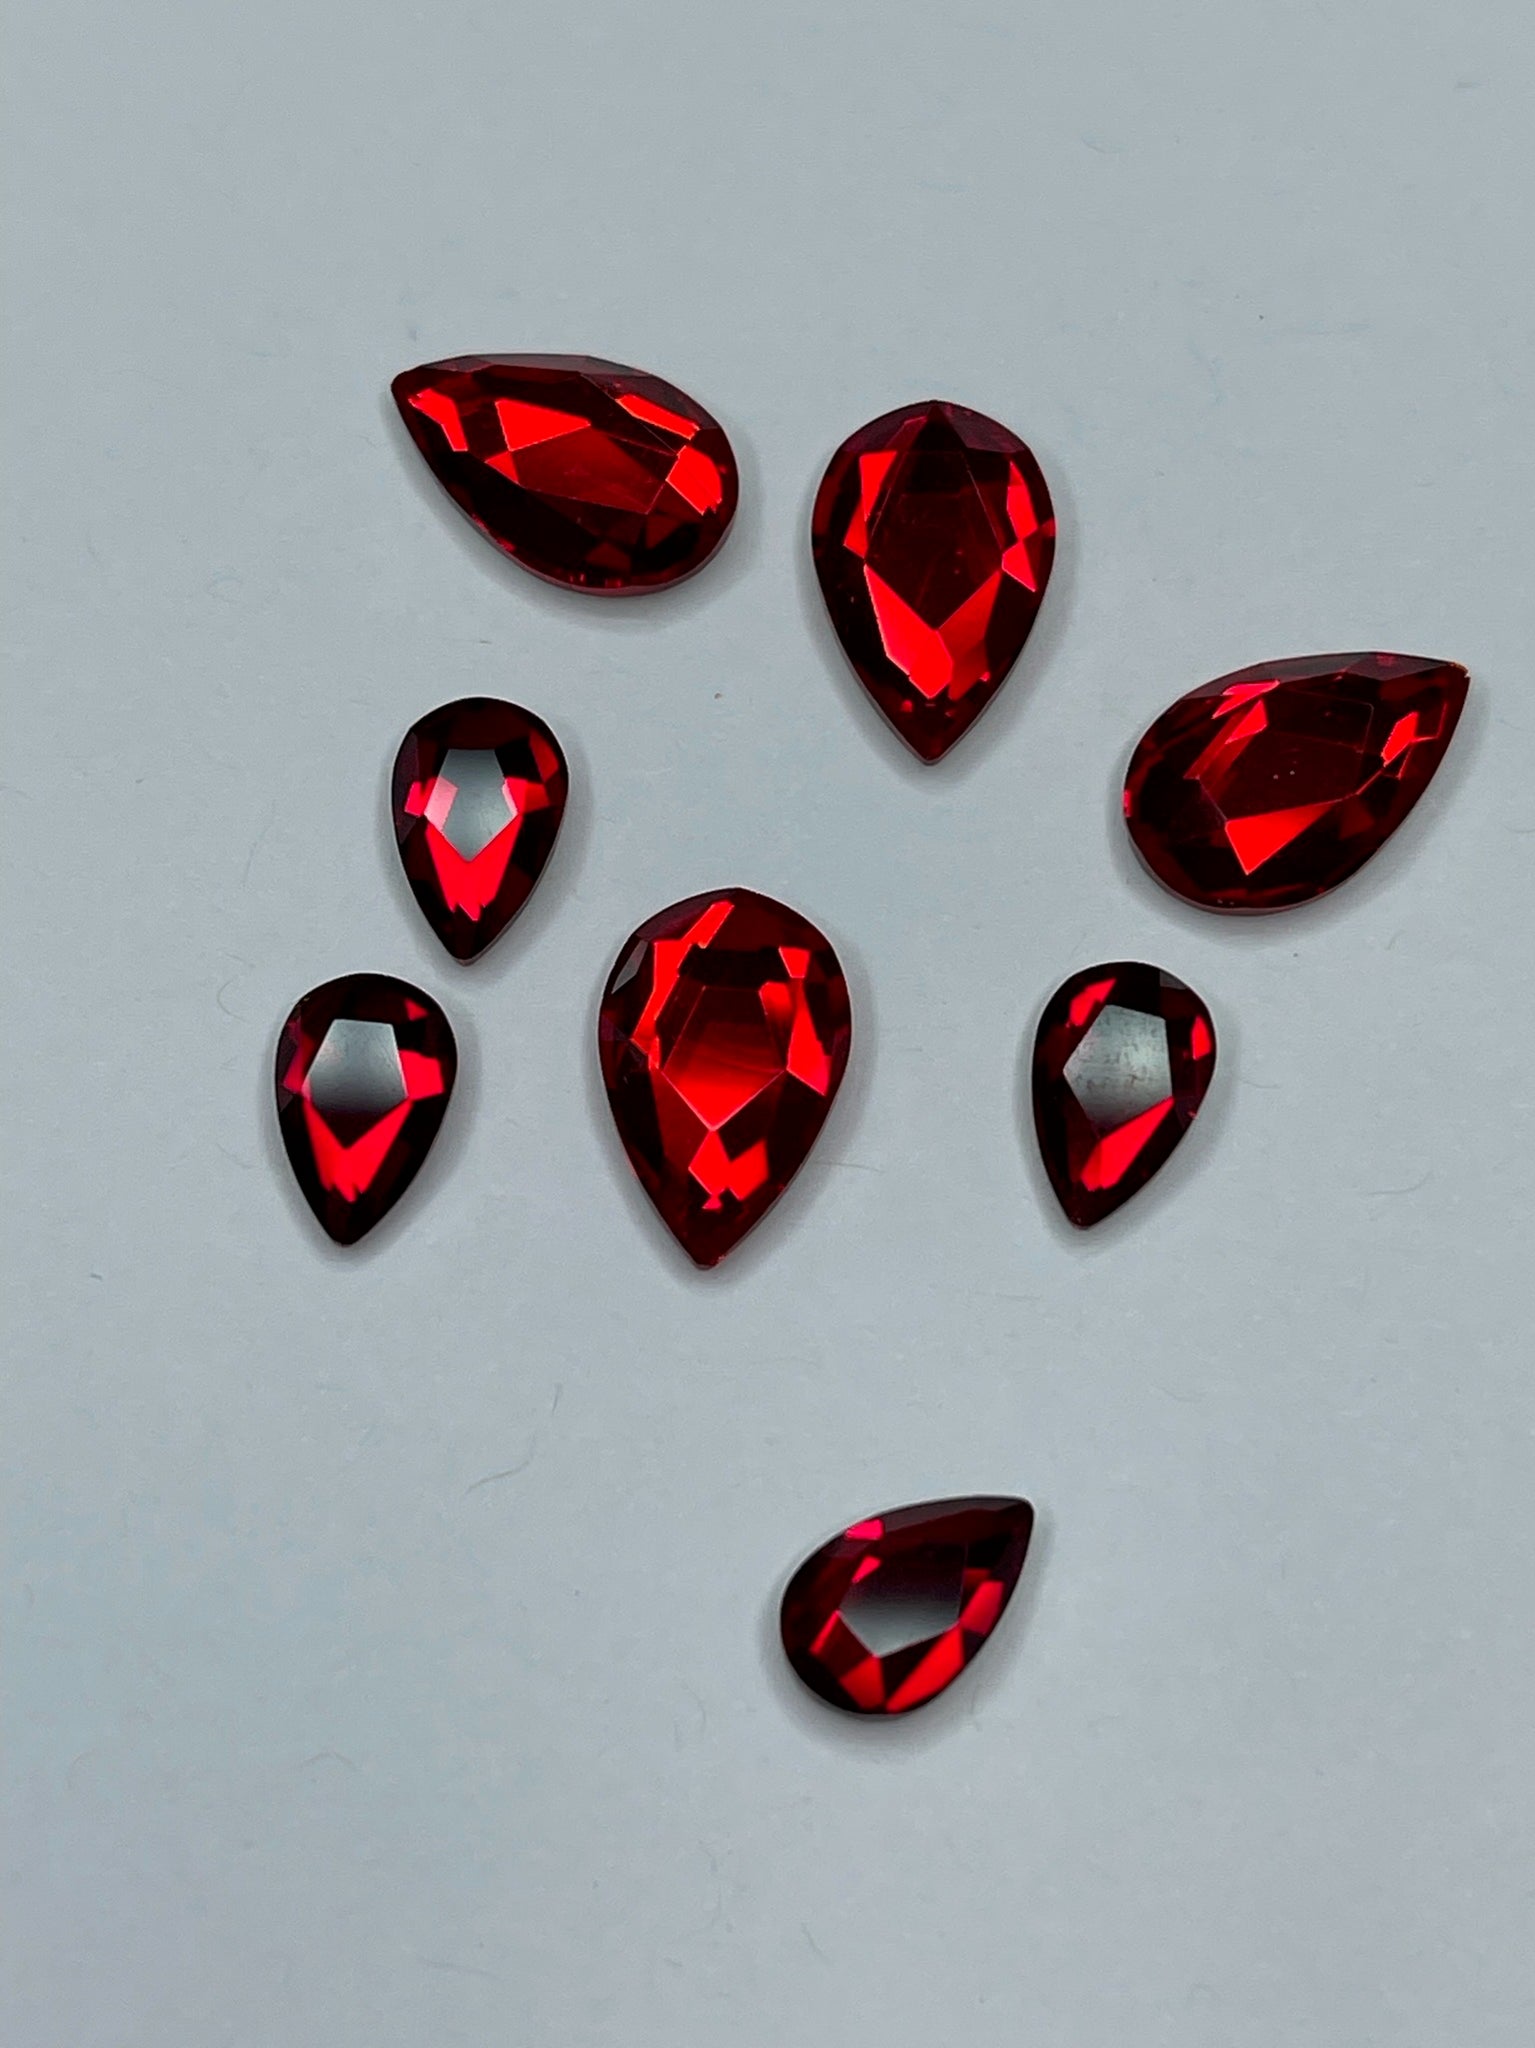 High Quality Crystals - Scarlet